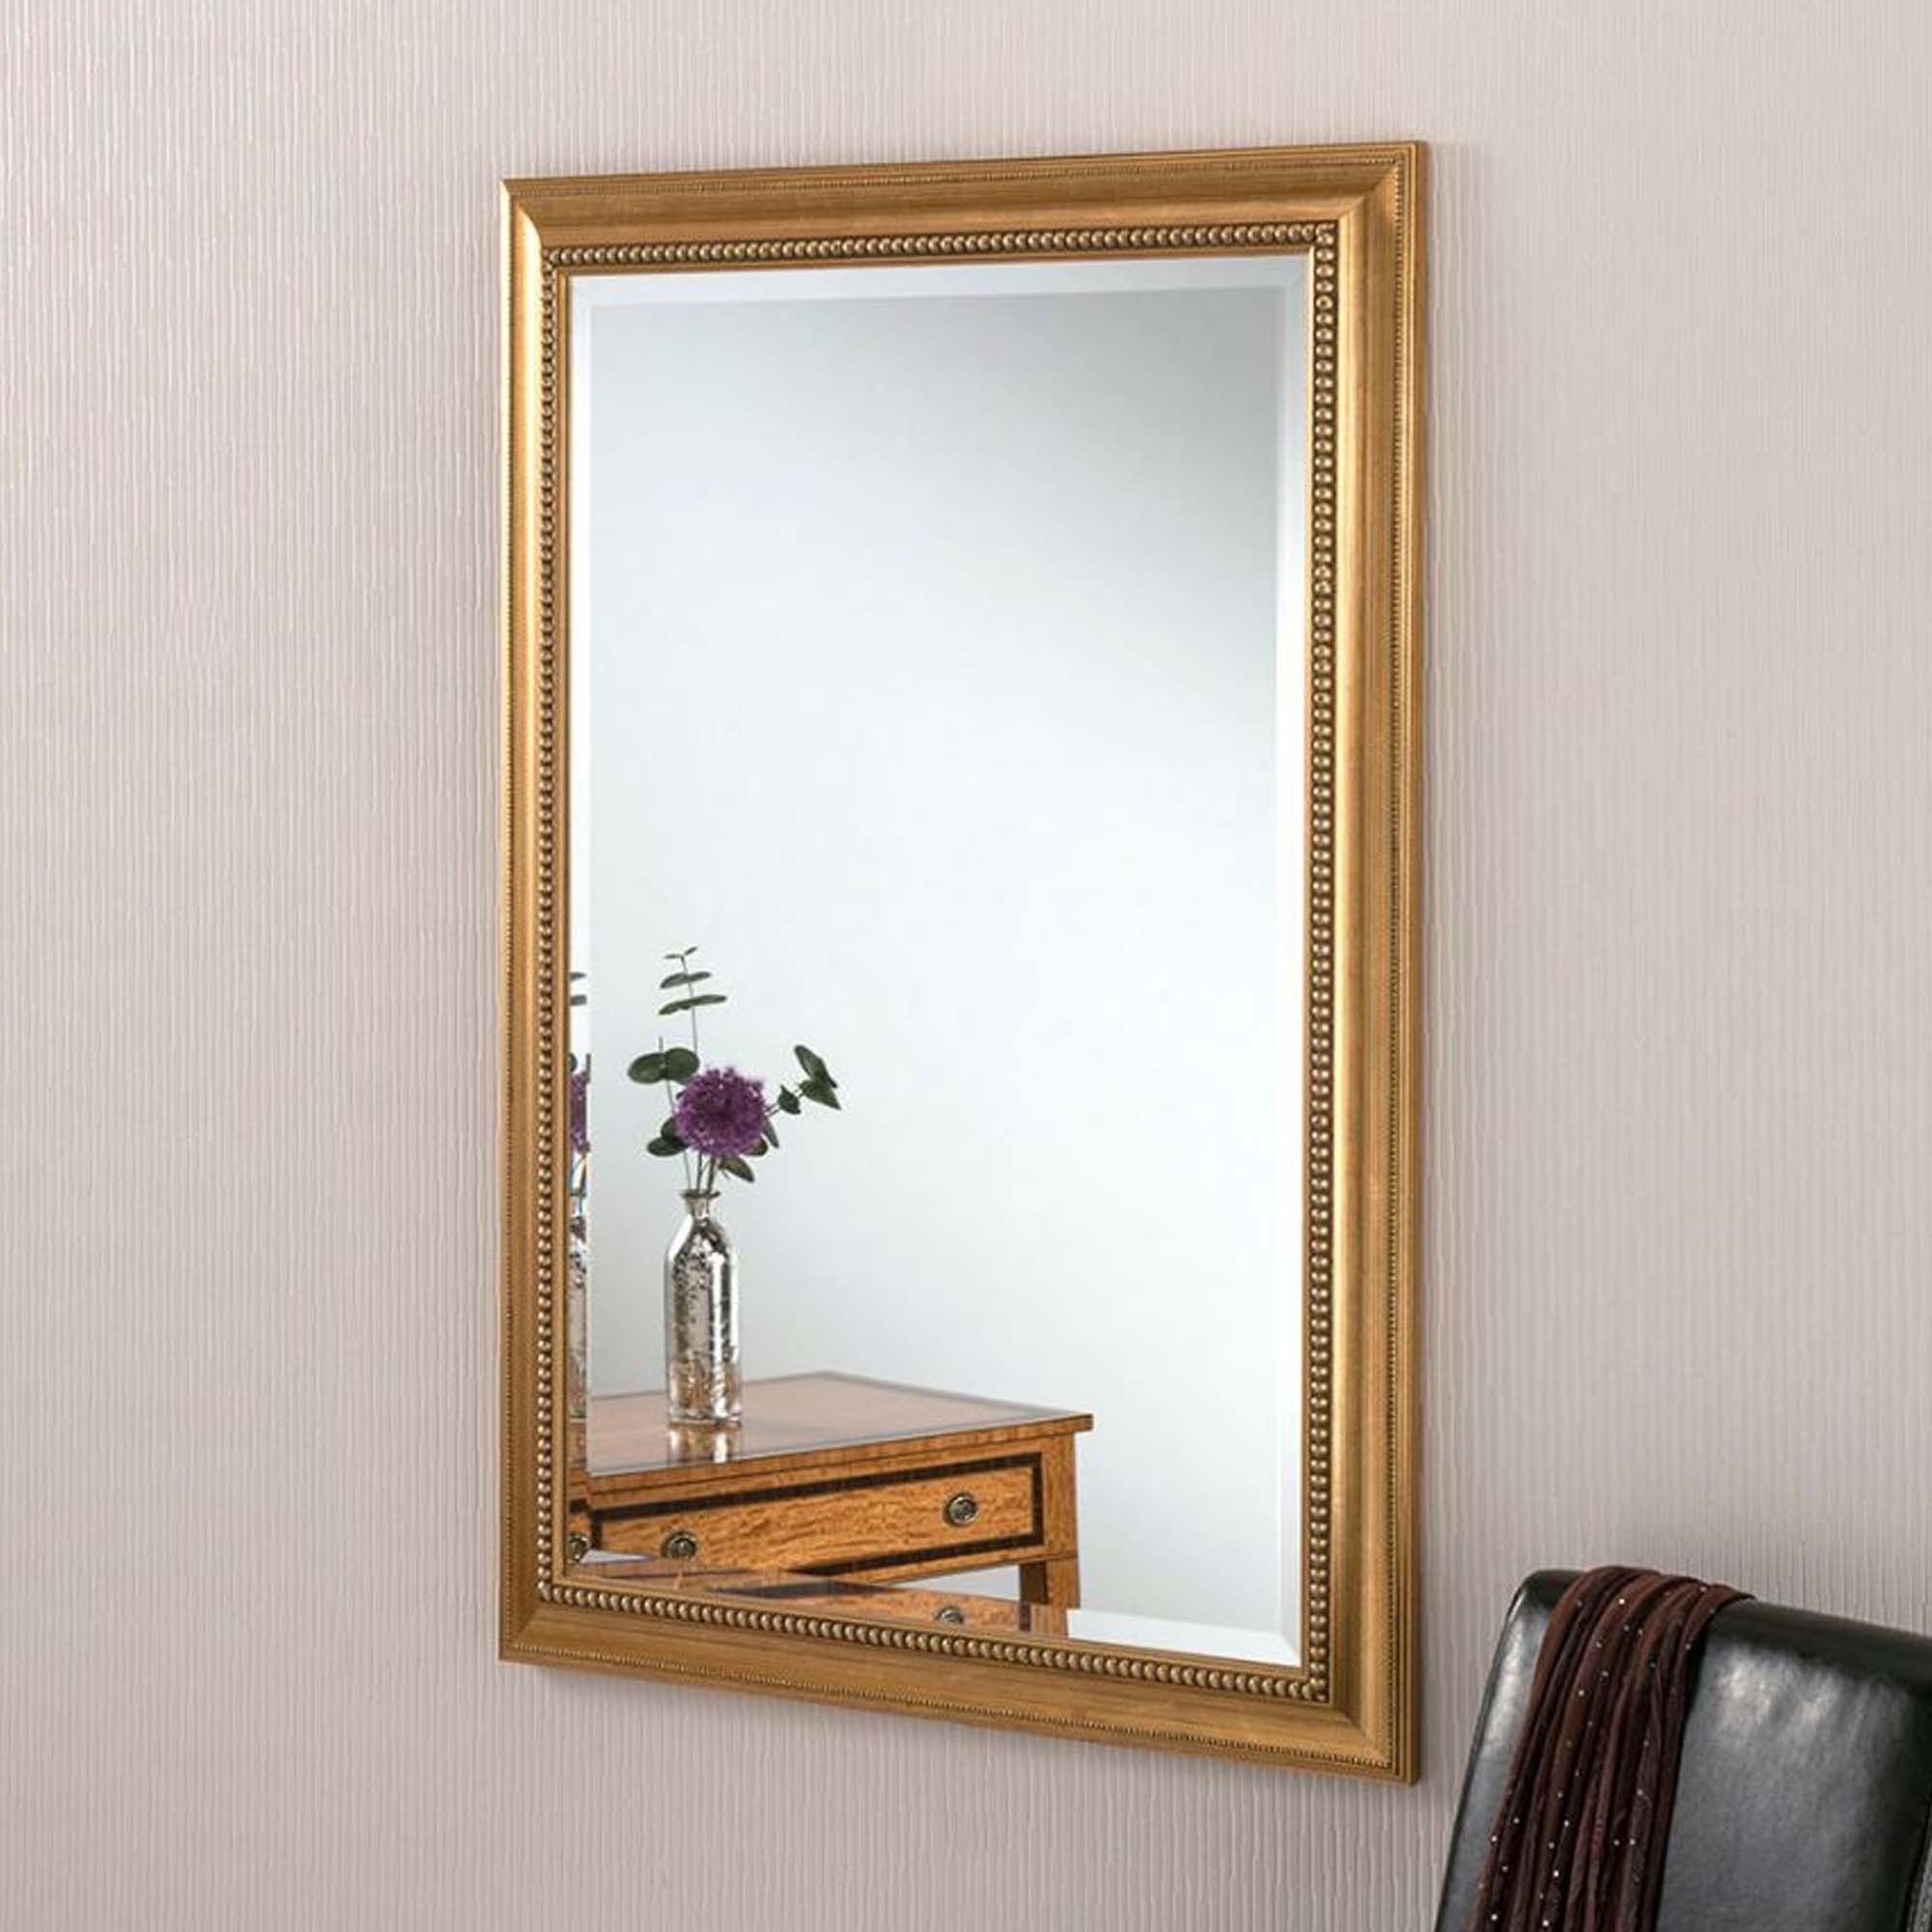 Homesdirect365 Throughout Most Recent Dark Gold Rectangular Wall Mirrors (View 11 of 15)